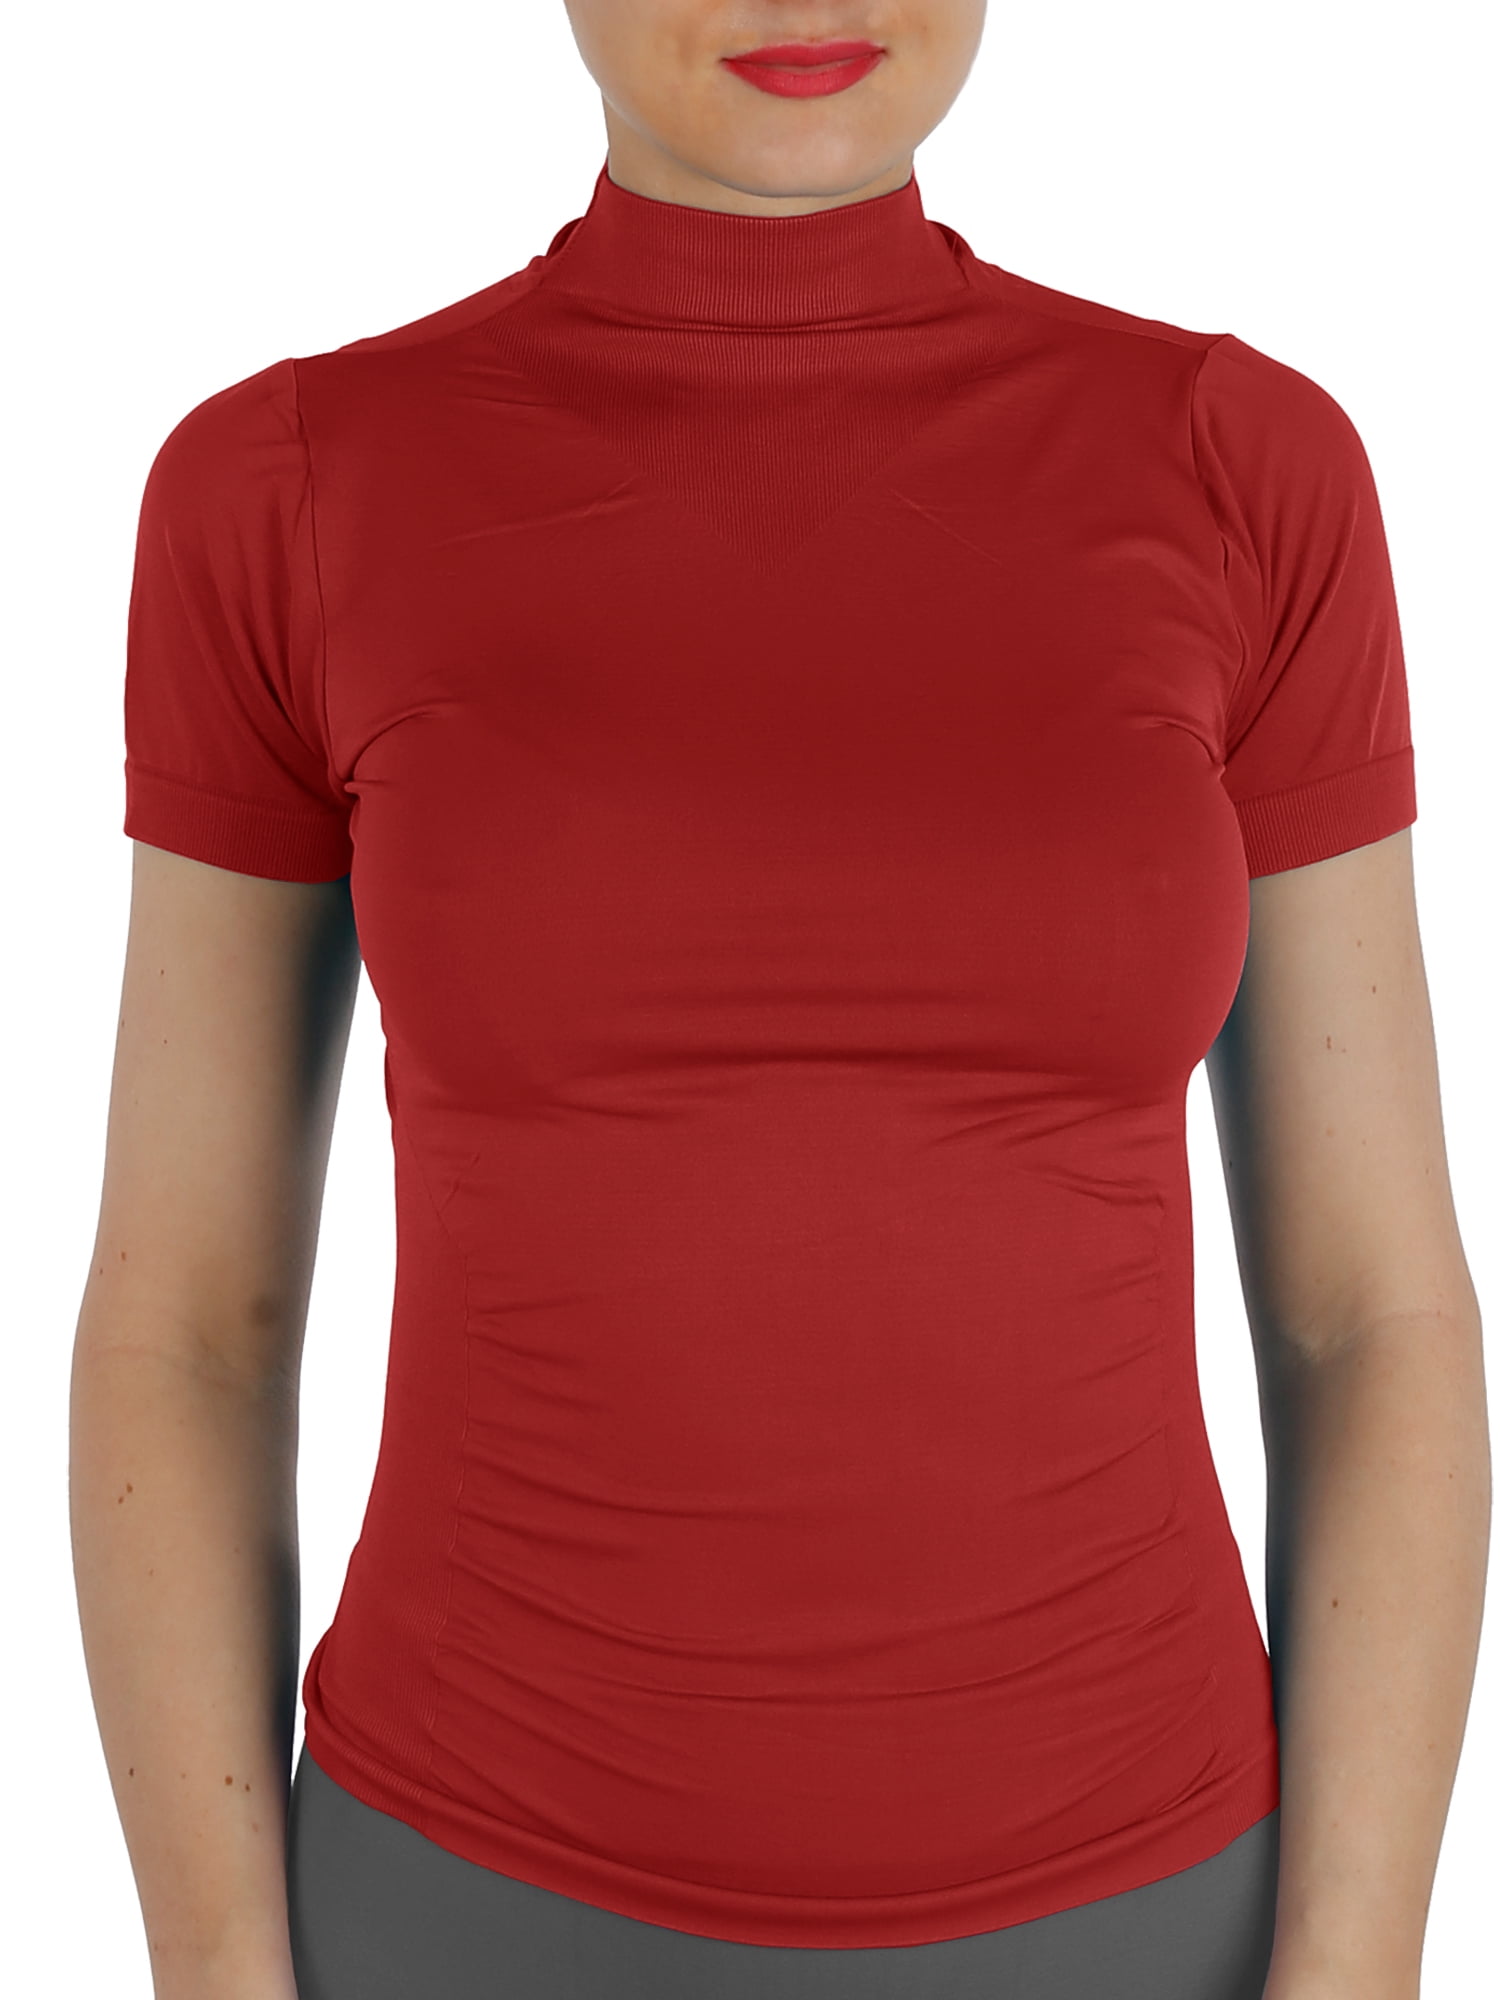 Simple Turtleneck workout top for Gym